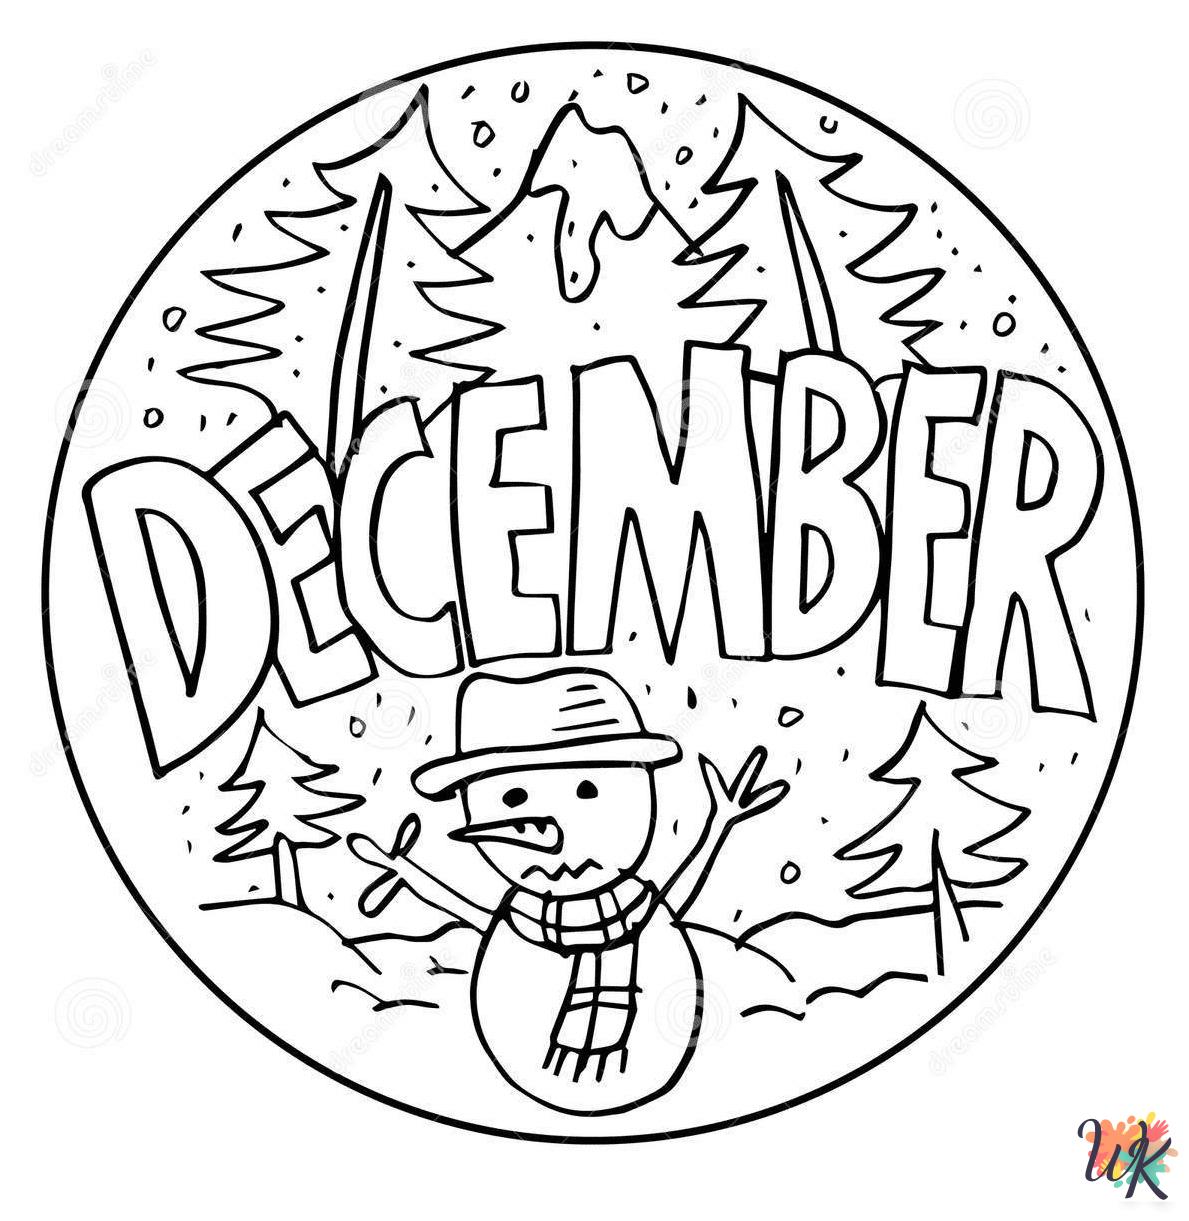 December coloring pages for adults easy